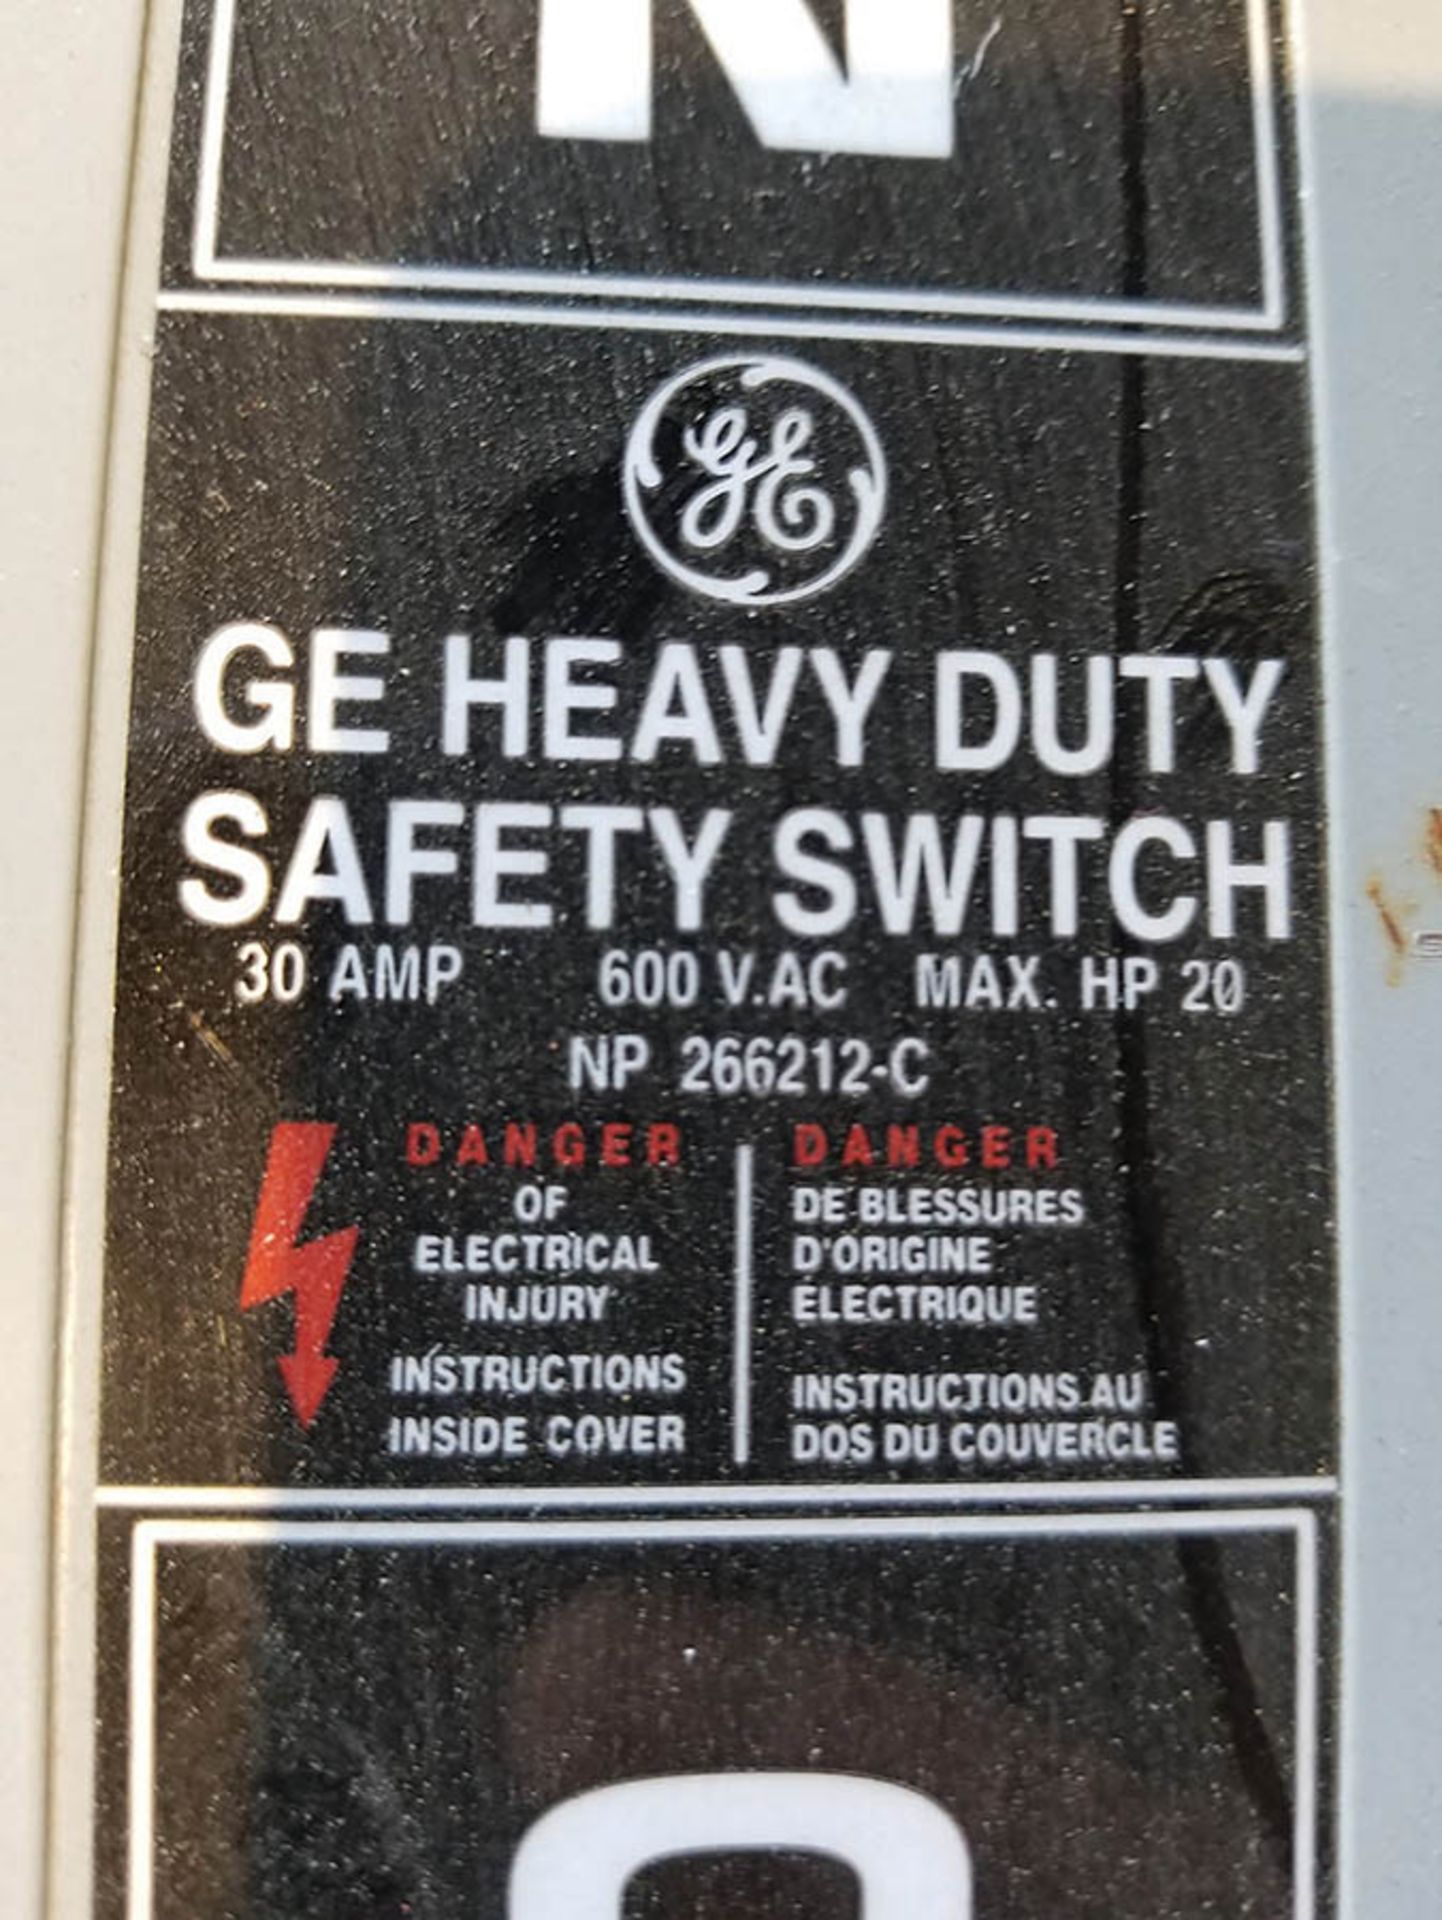 GE HD SAFETY SWITCH 30 AMP, 600 VAC, MAX HP 20 - Image 2 of 2